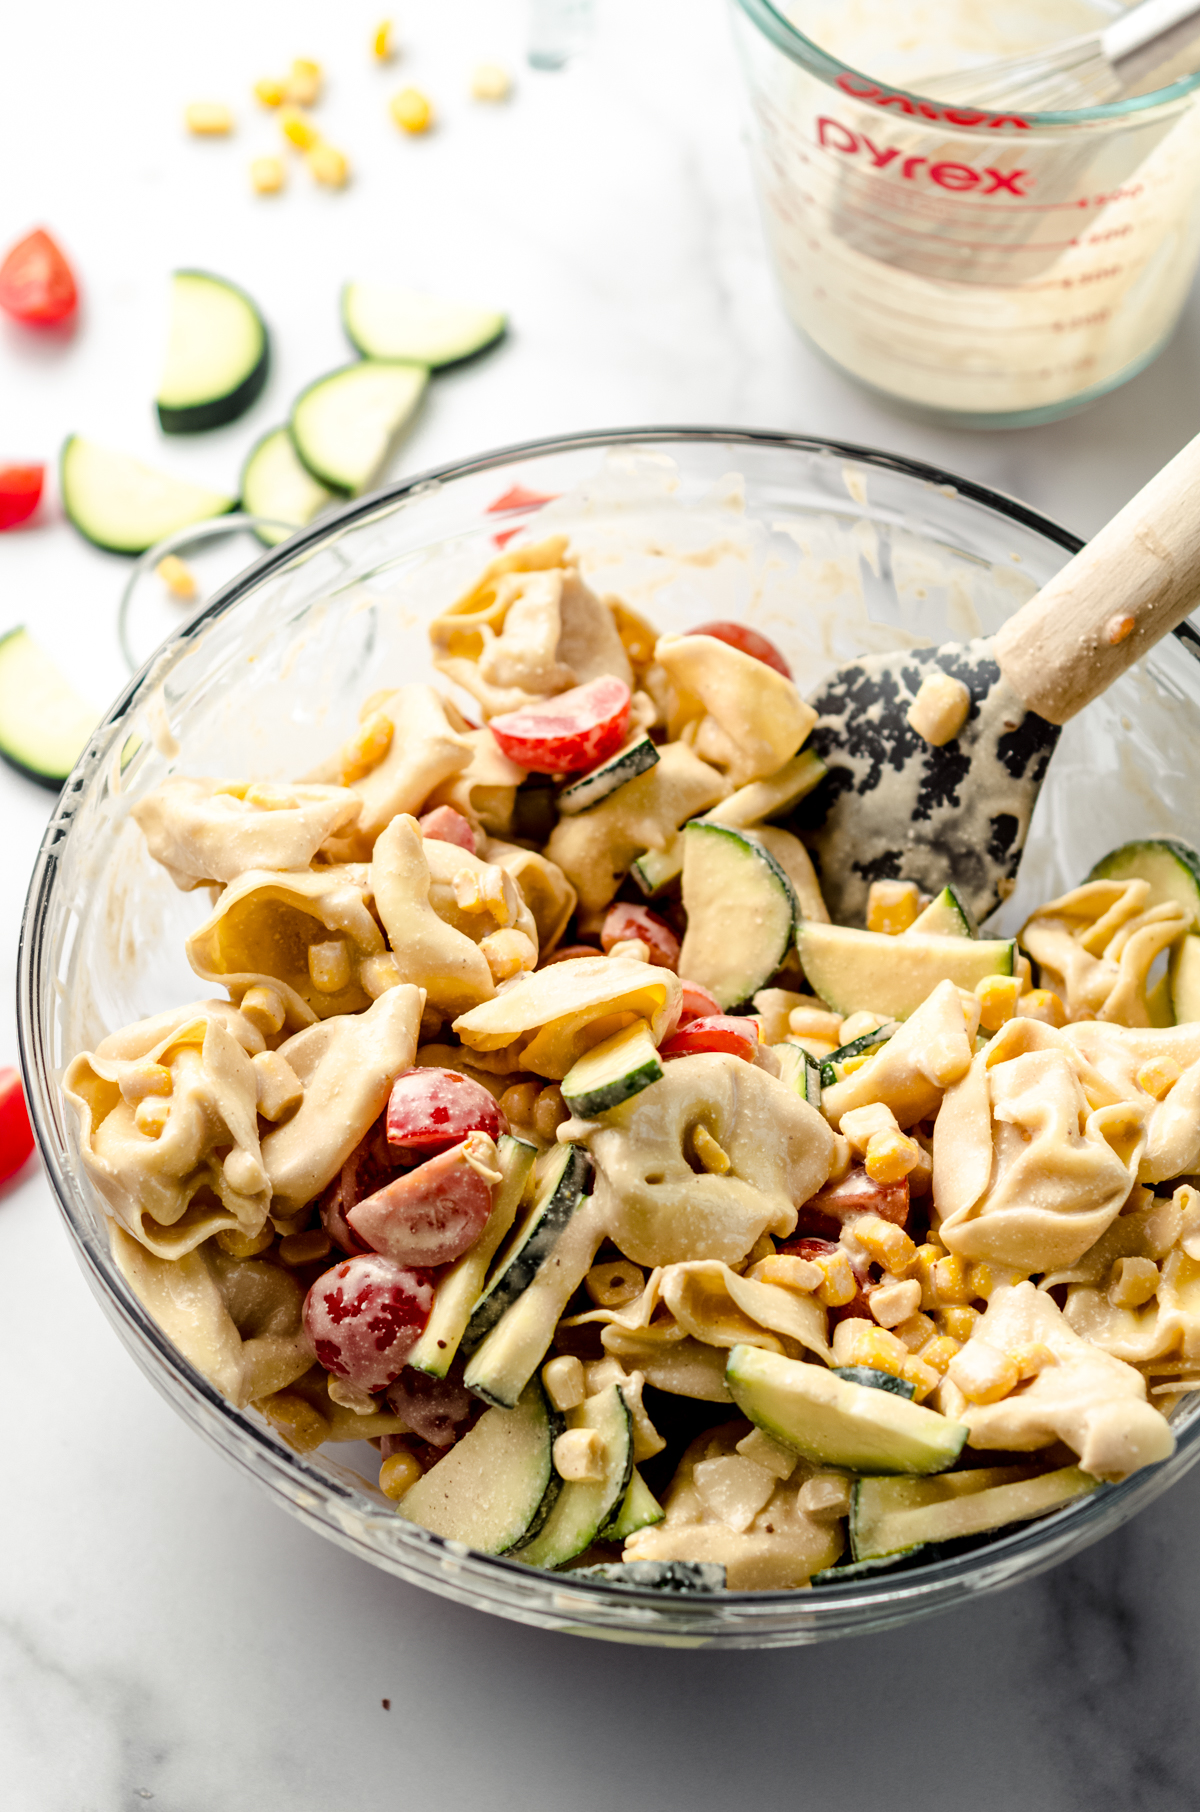 Tortellini pasta salad in a bowl with a spatula.